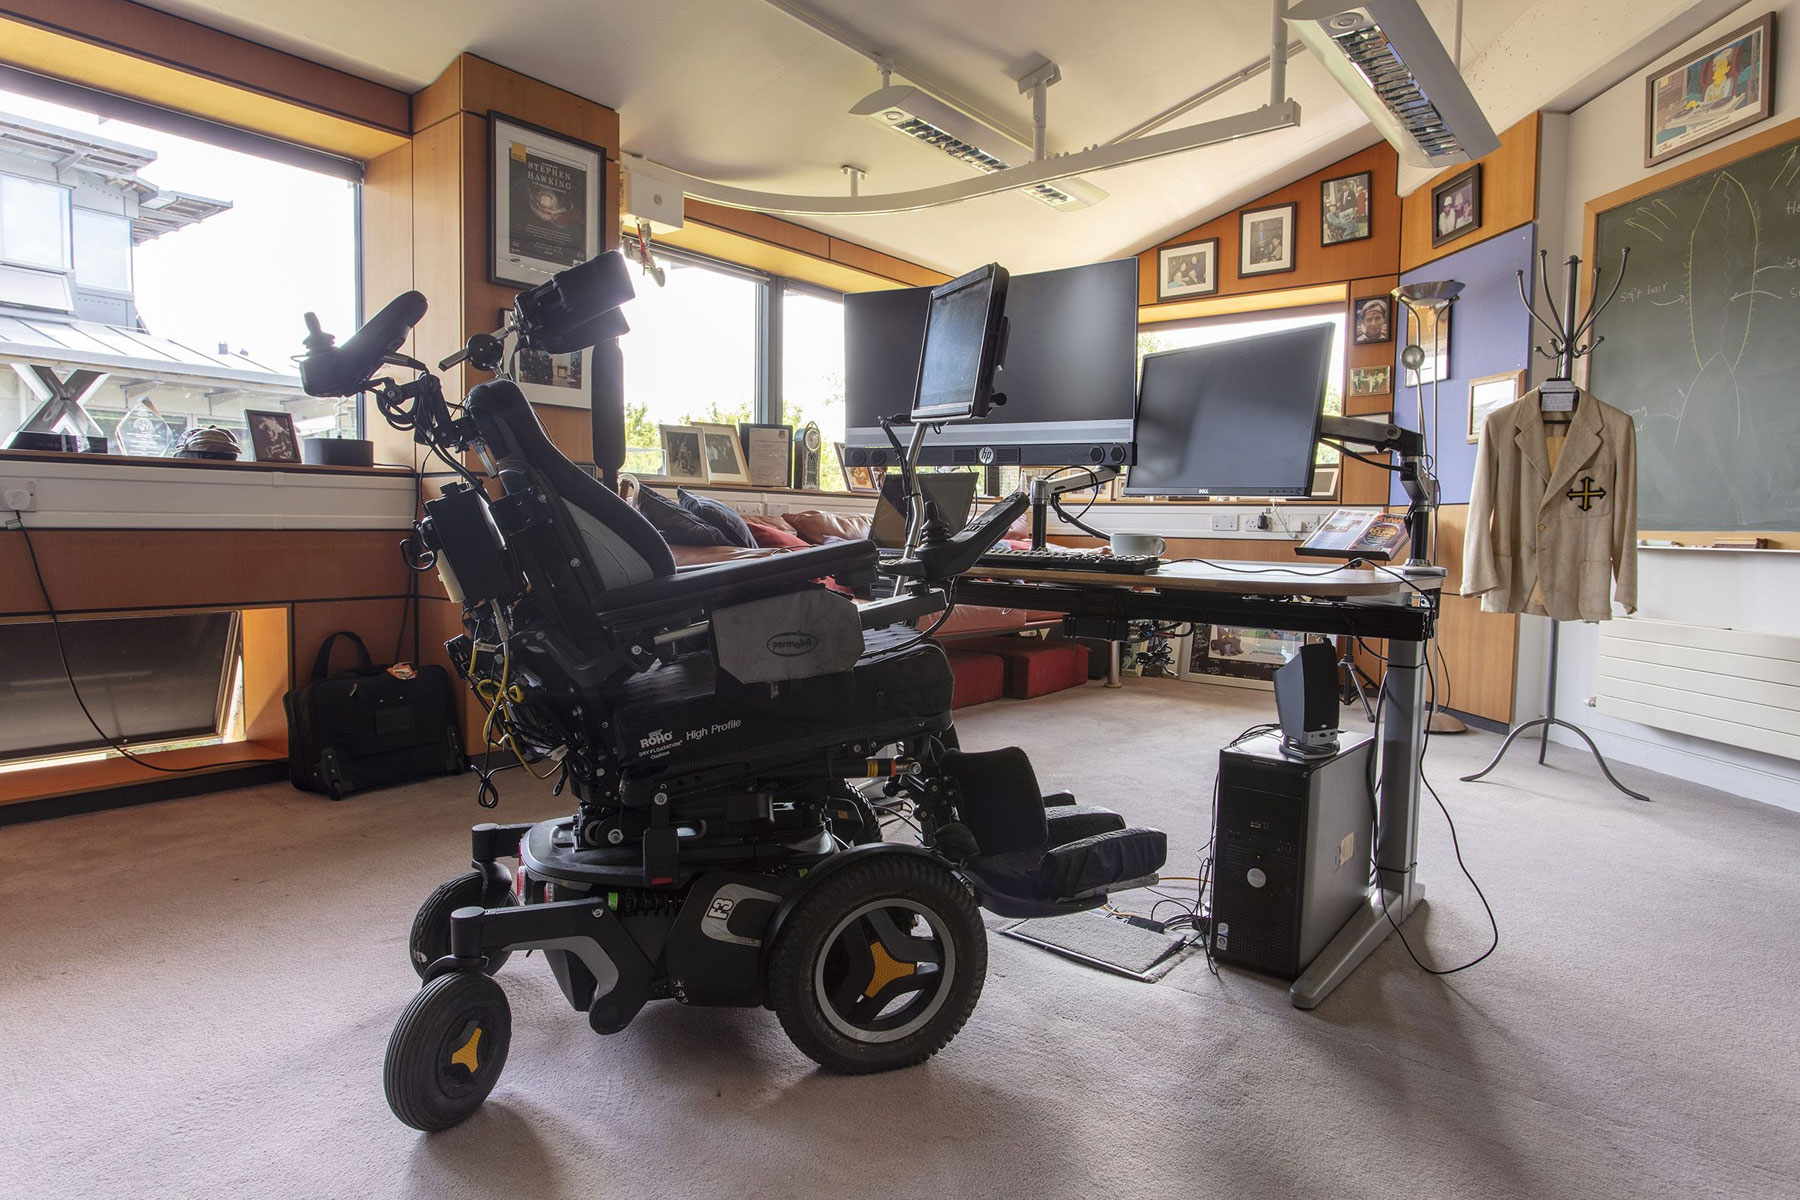 Stephen Hawking's office coming to the Science Museum